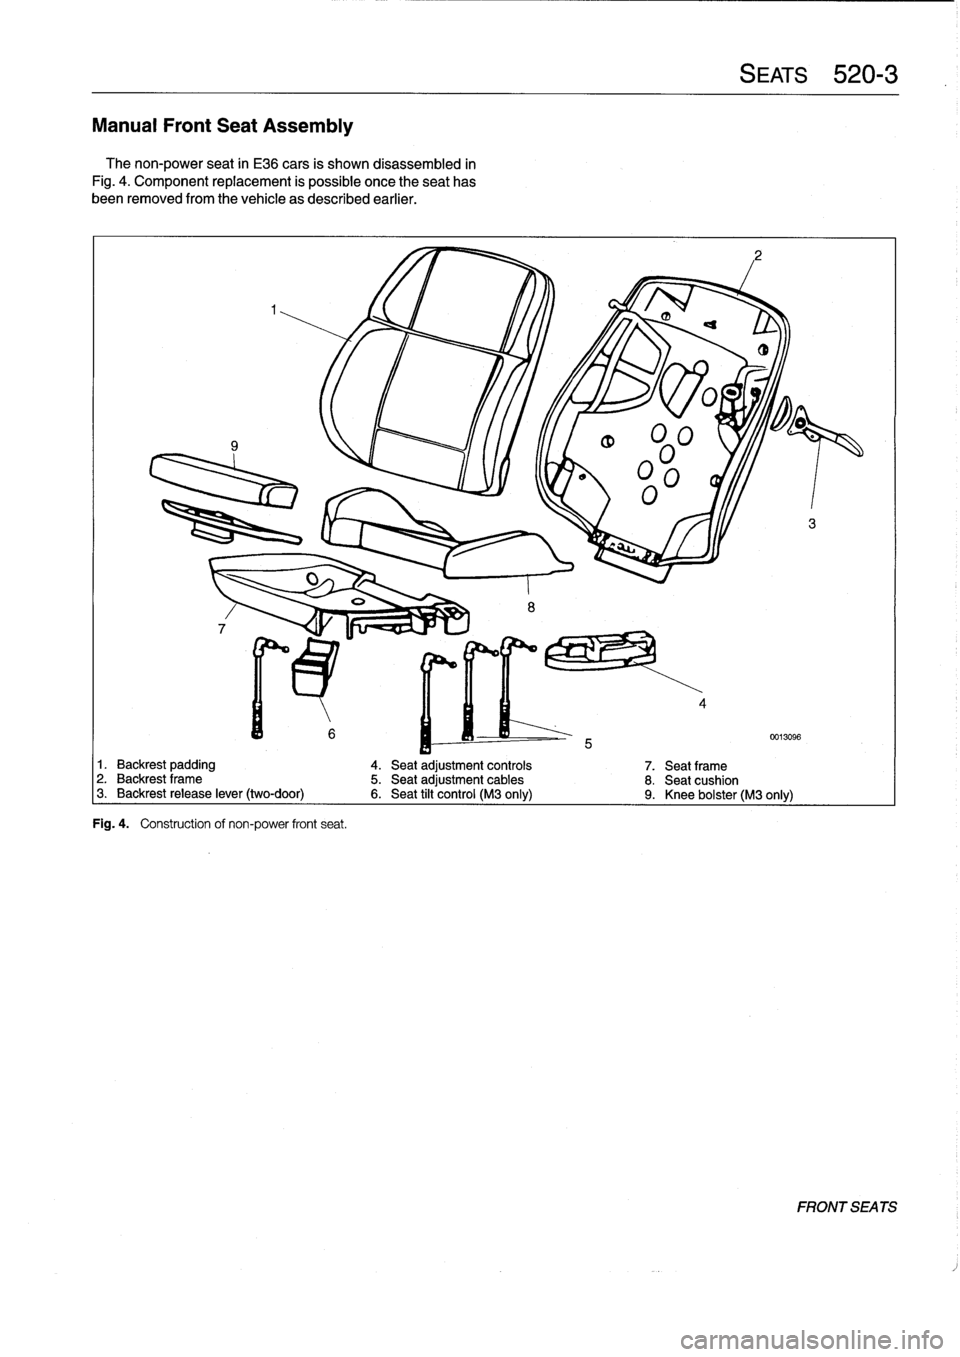 BMW 328i 1995 E36 Workshop Manual 
Manual
Front
Seat
Assembly

The
non-power
seat
in
E36
cars
is
shown
disassembled
in

Fig
.
4
.
Component
replacement
is
possible
once
theseat
has

been
removed
from
the
vehicle
as
described
earlier
.